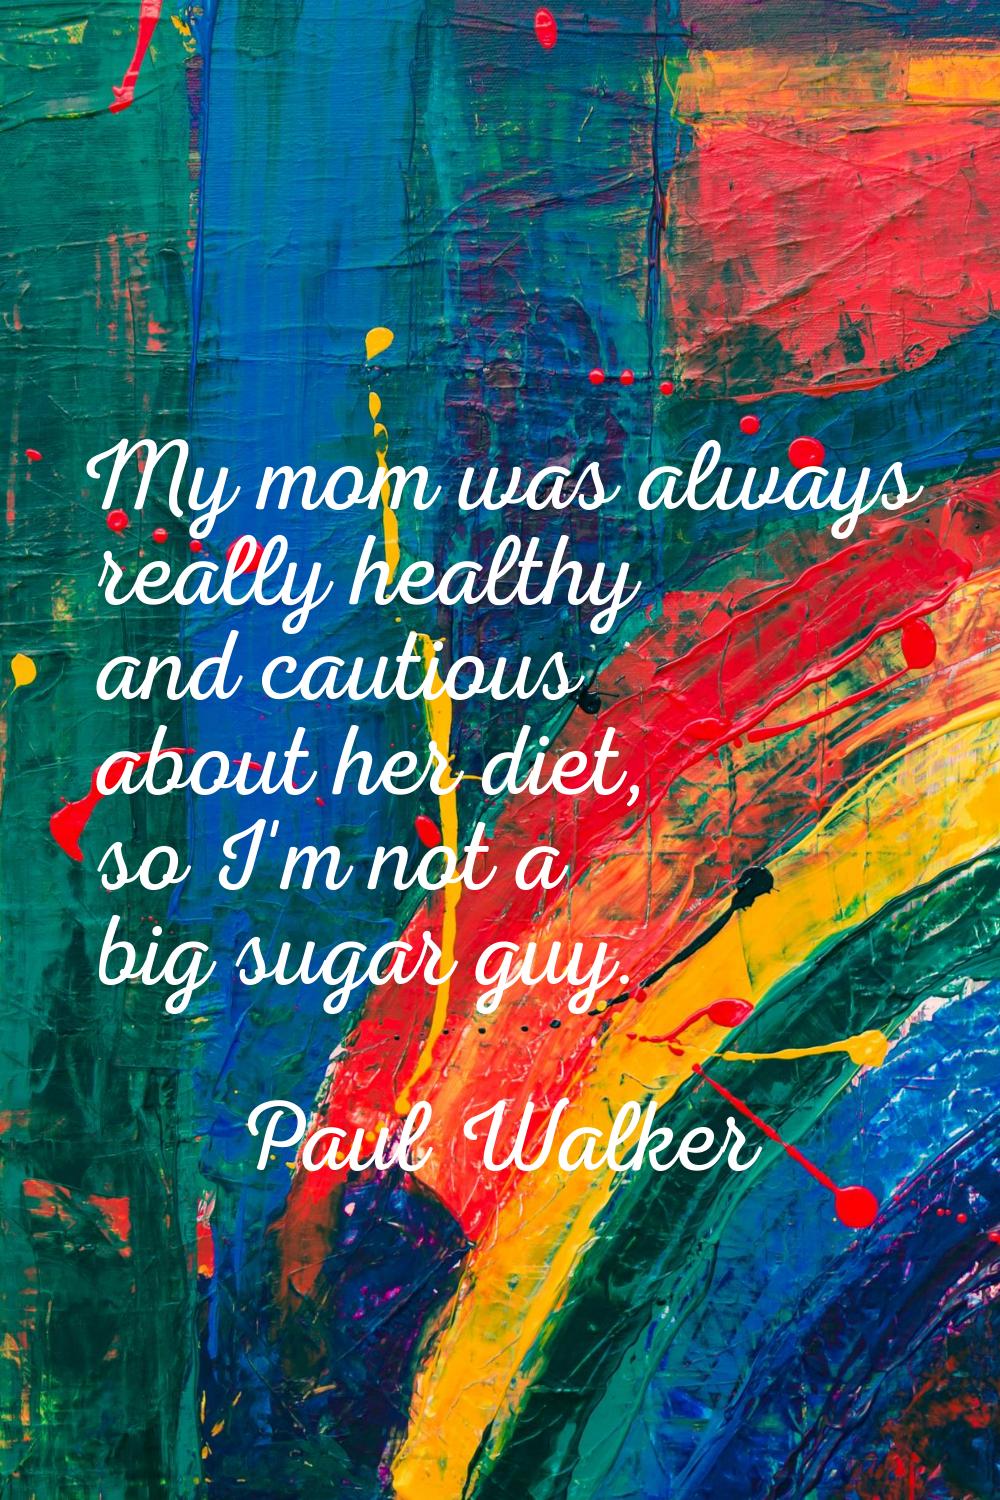 My mom was always really healthy and cautious about her diet, so I'm not a big sugar guy.